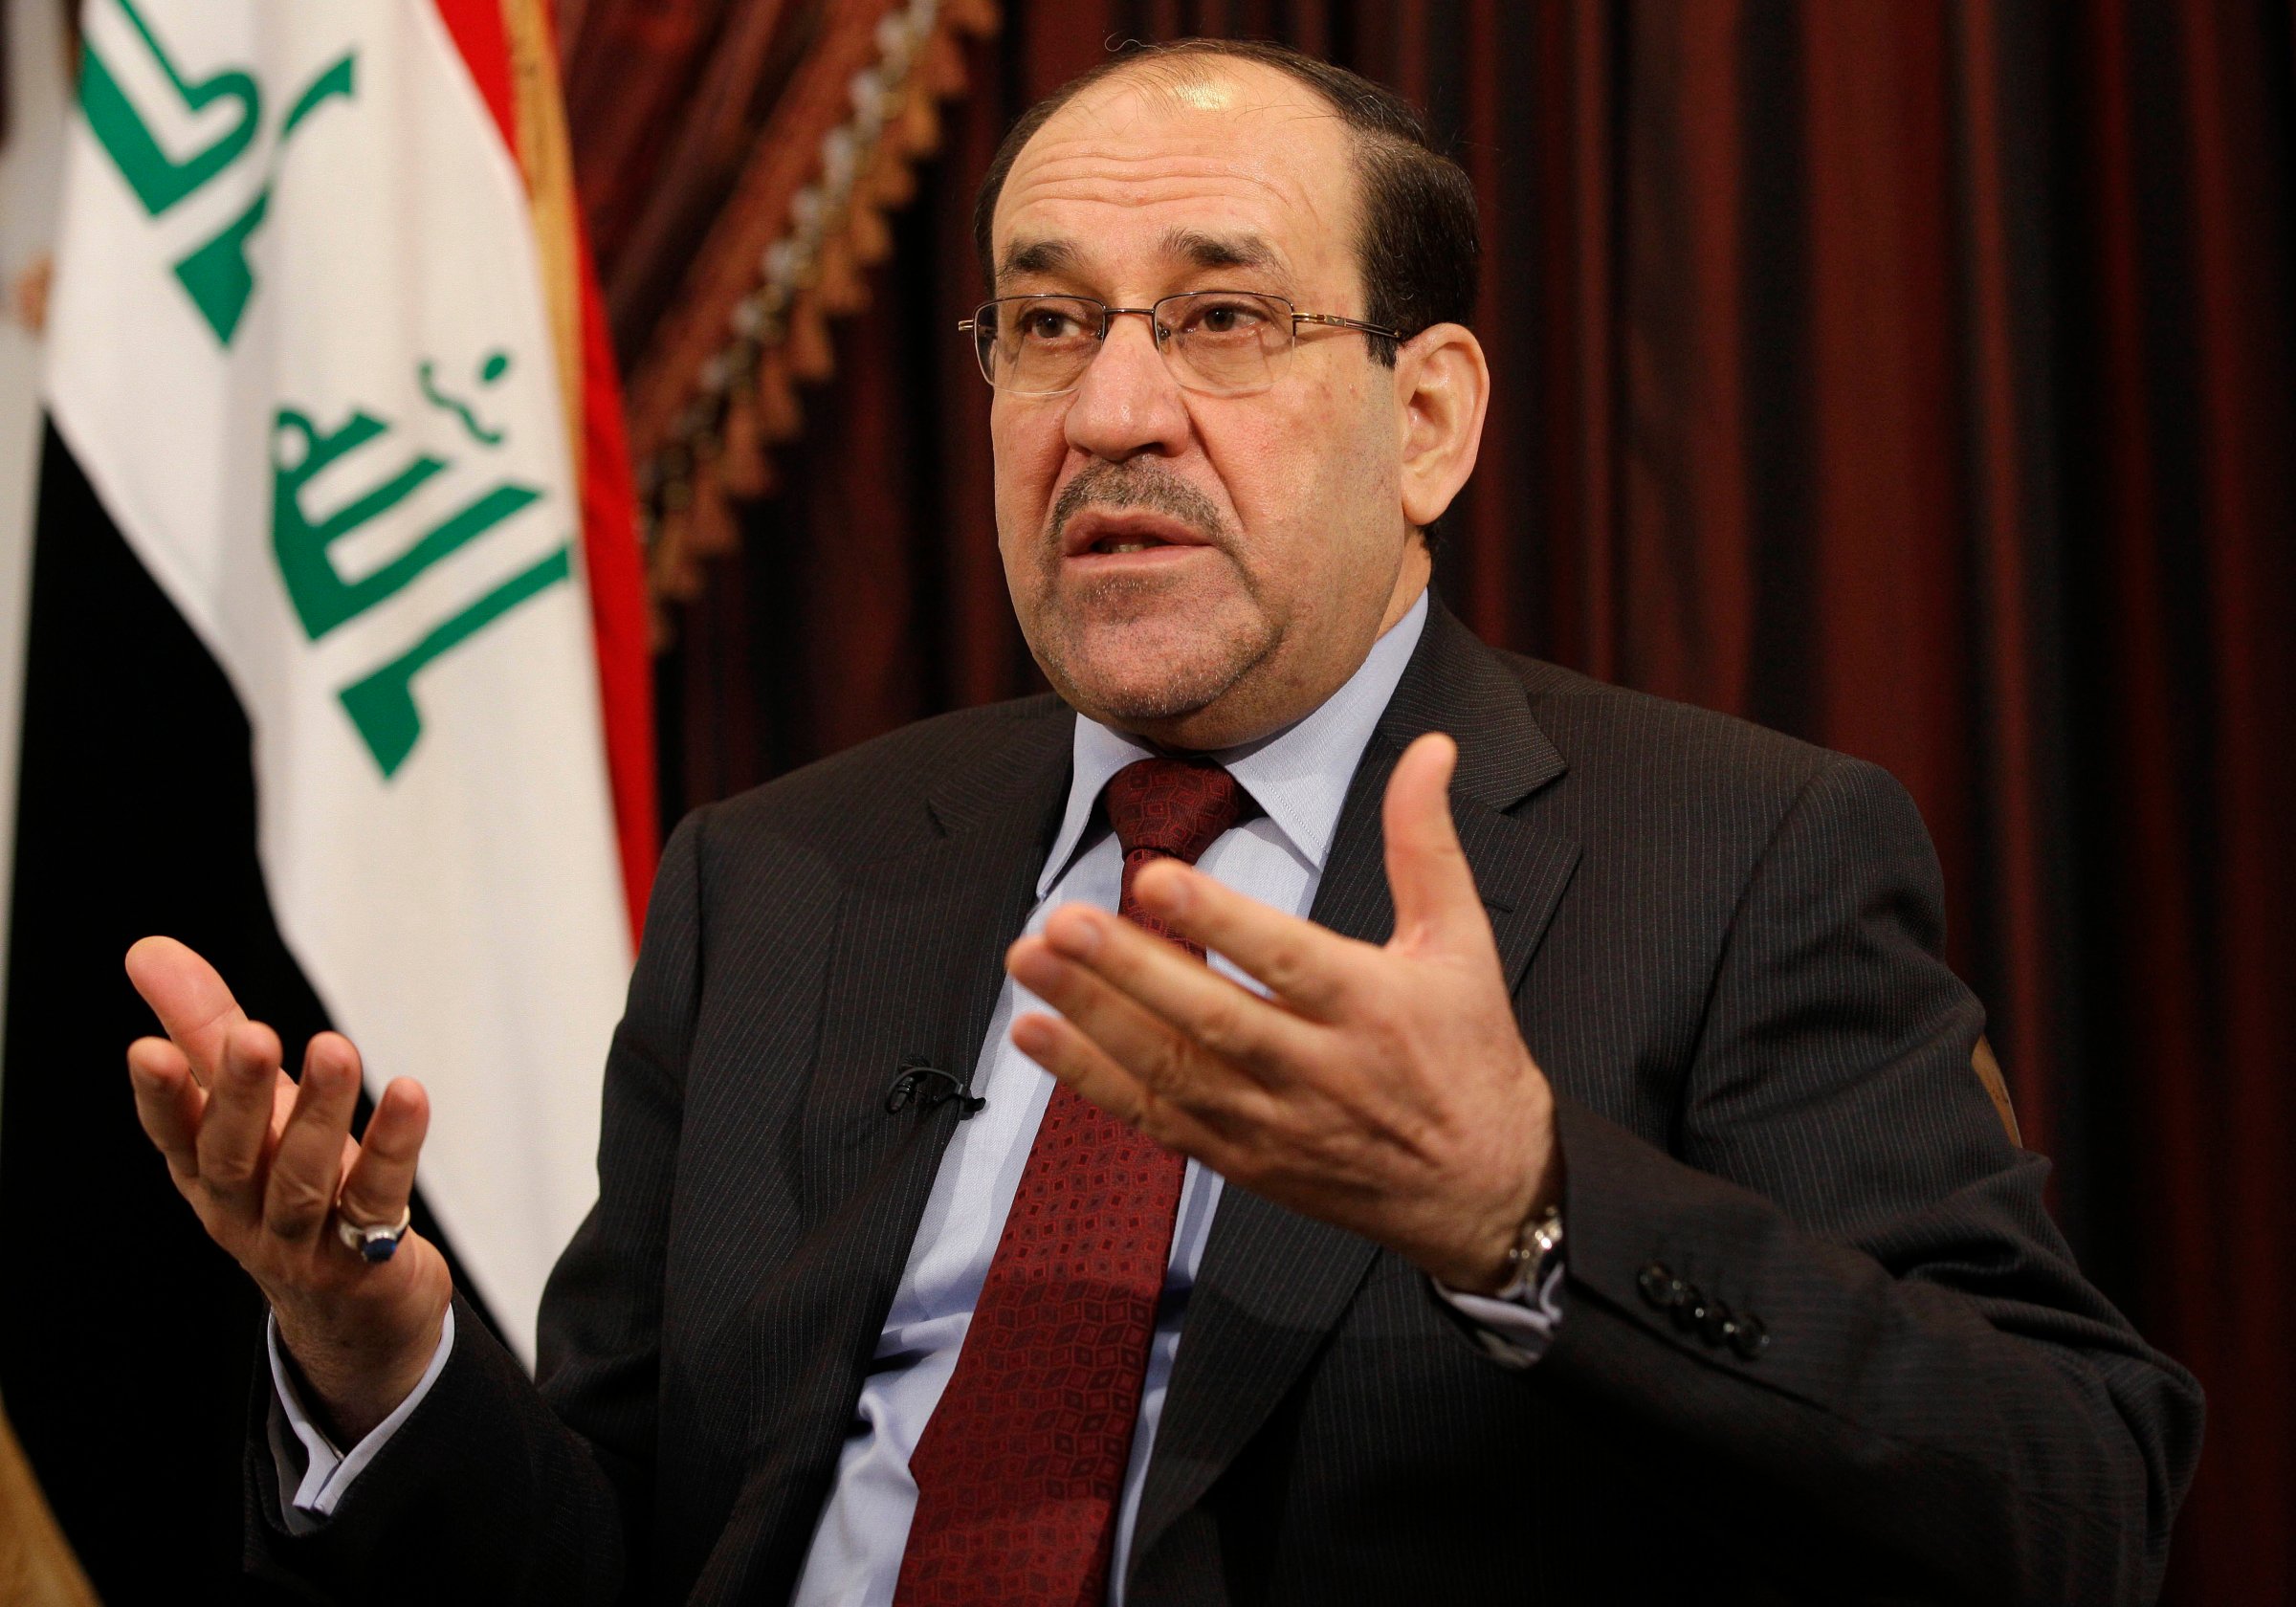 Iraq's Prime Minister Nouri al-Maliki speaks during an interview with The Associated Press in Baghdad, Iraq on December 3, 2011.